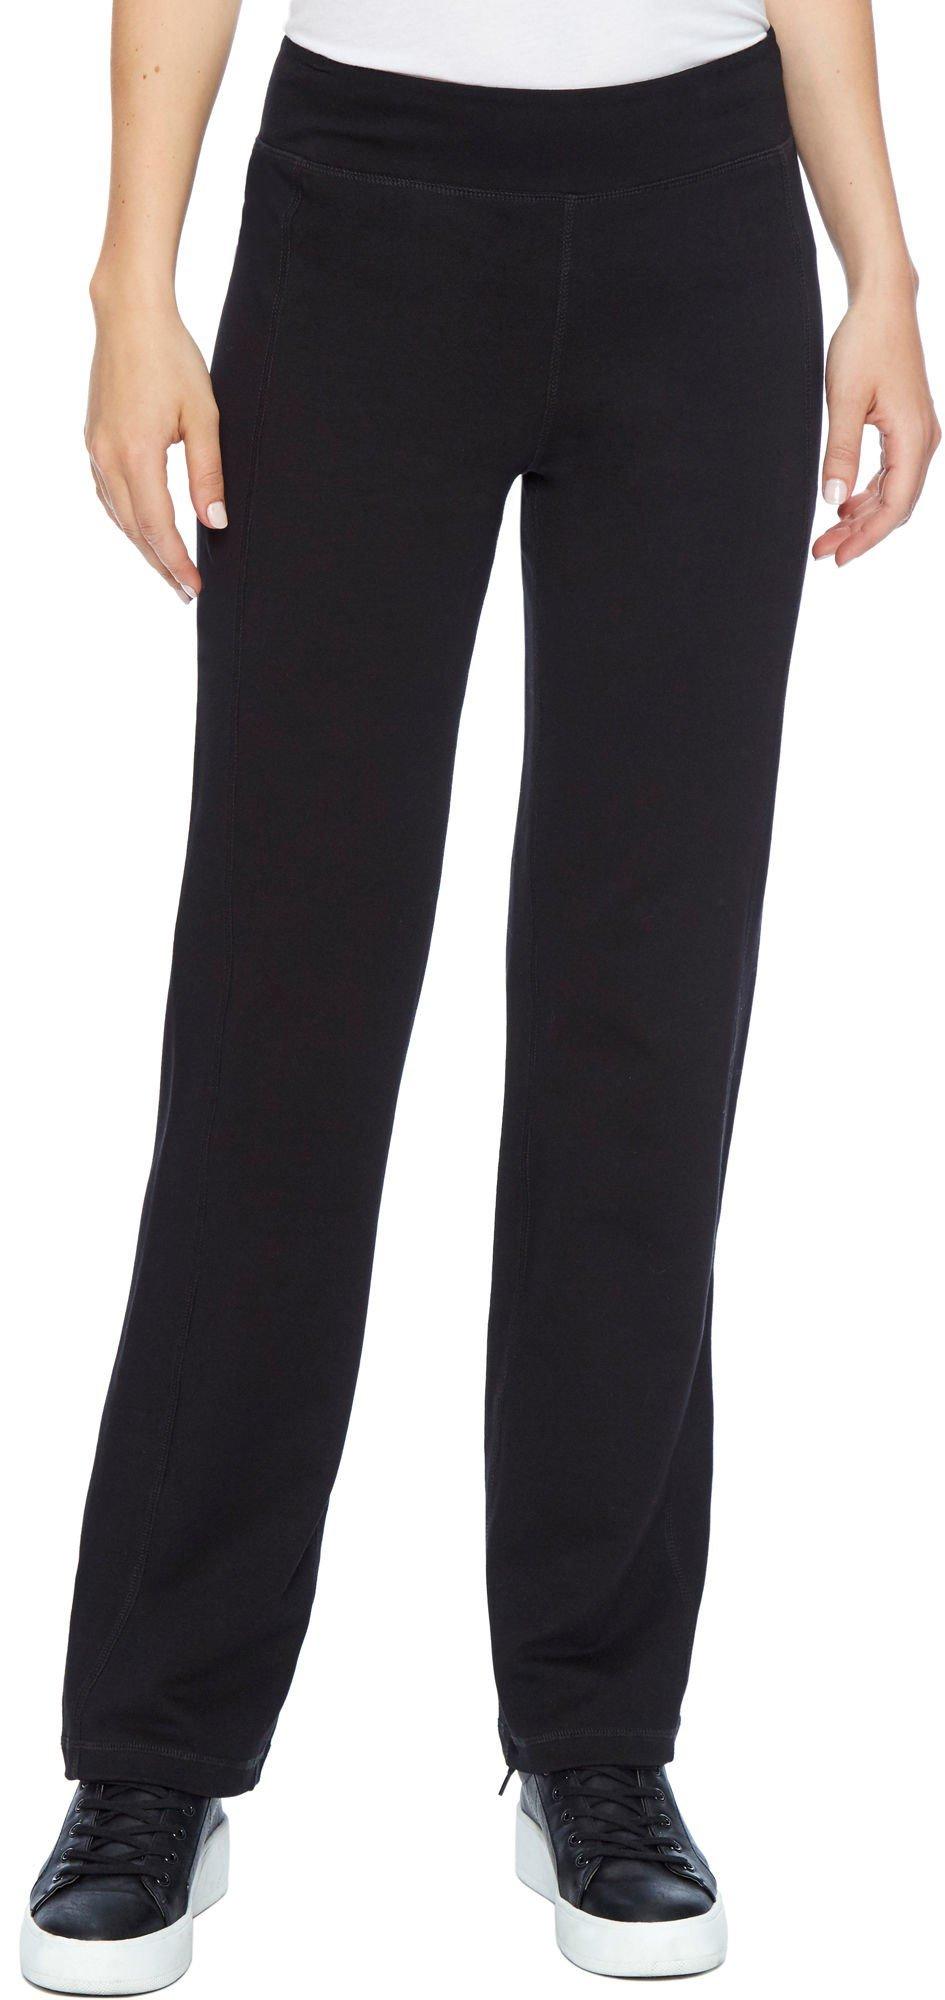 Alia Feather Touch Pull On Pants | Bealls Florida